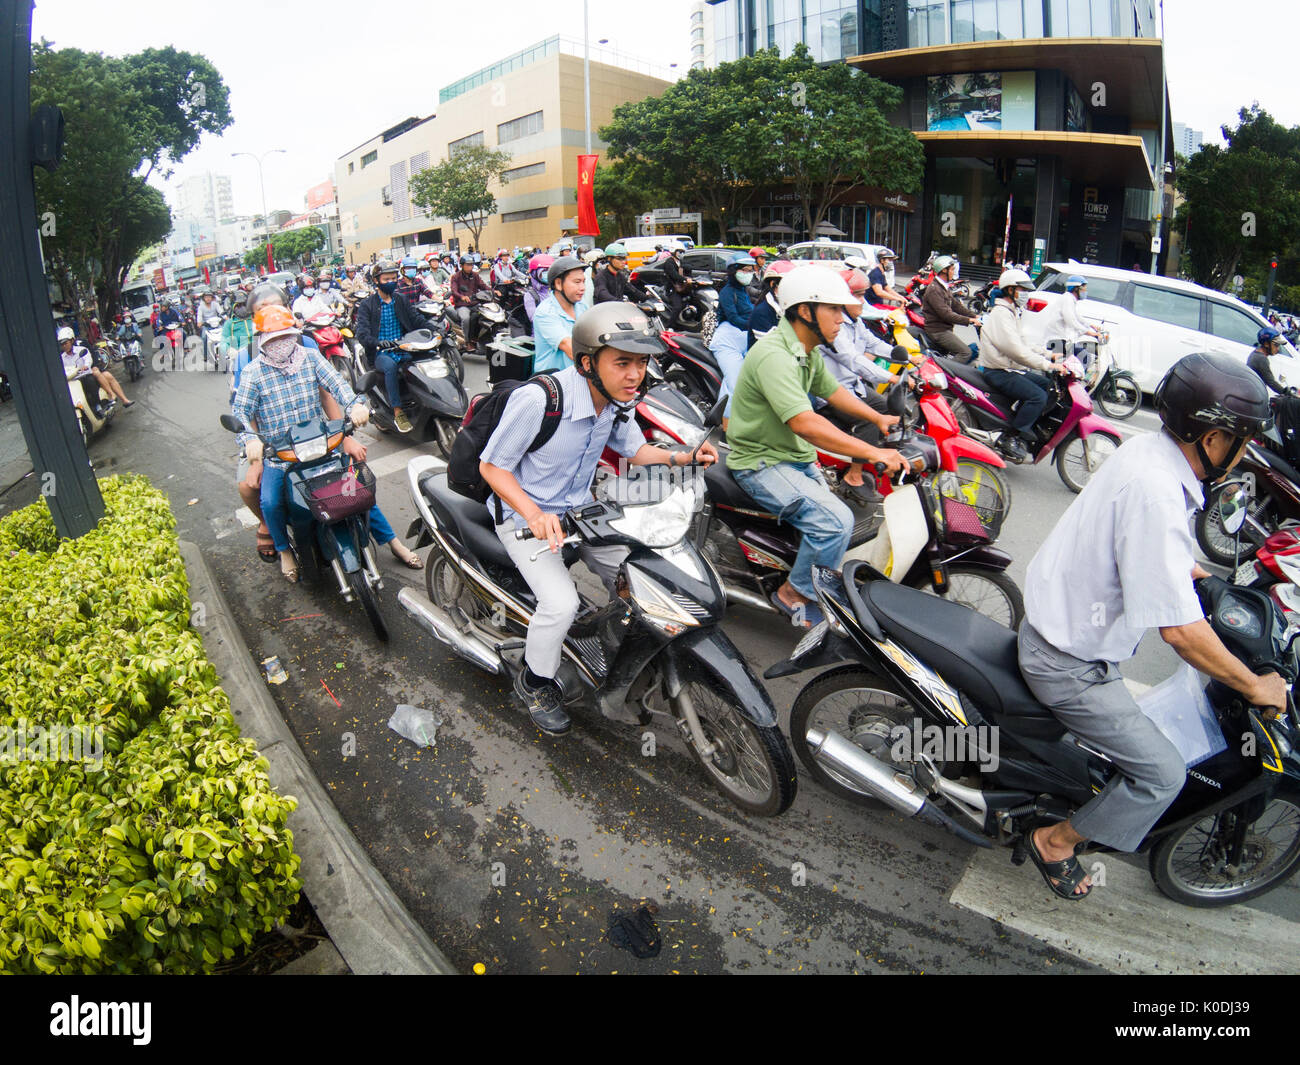 HO CHI MINH CITY, VIETNAM - JULY 25, 2017: Road traffic in Saigon, Vietnam. In the biggest city in Southern Vietnam are more than 4 mil. motorbikes, t Stock Photo